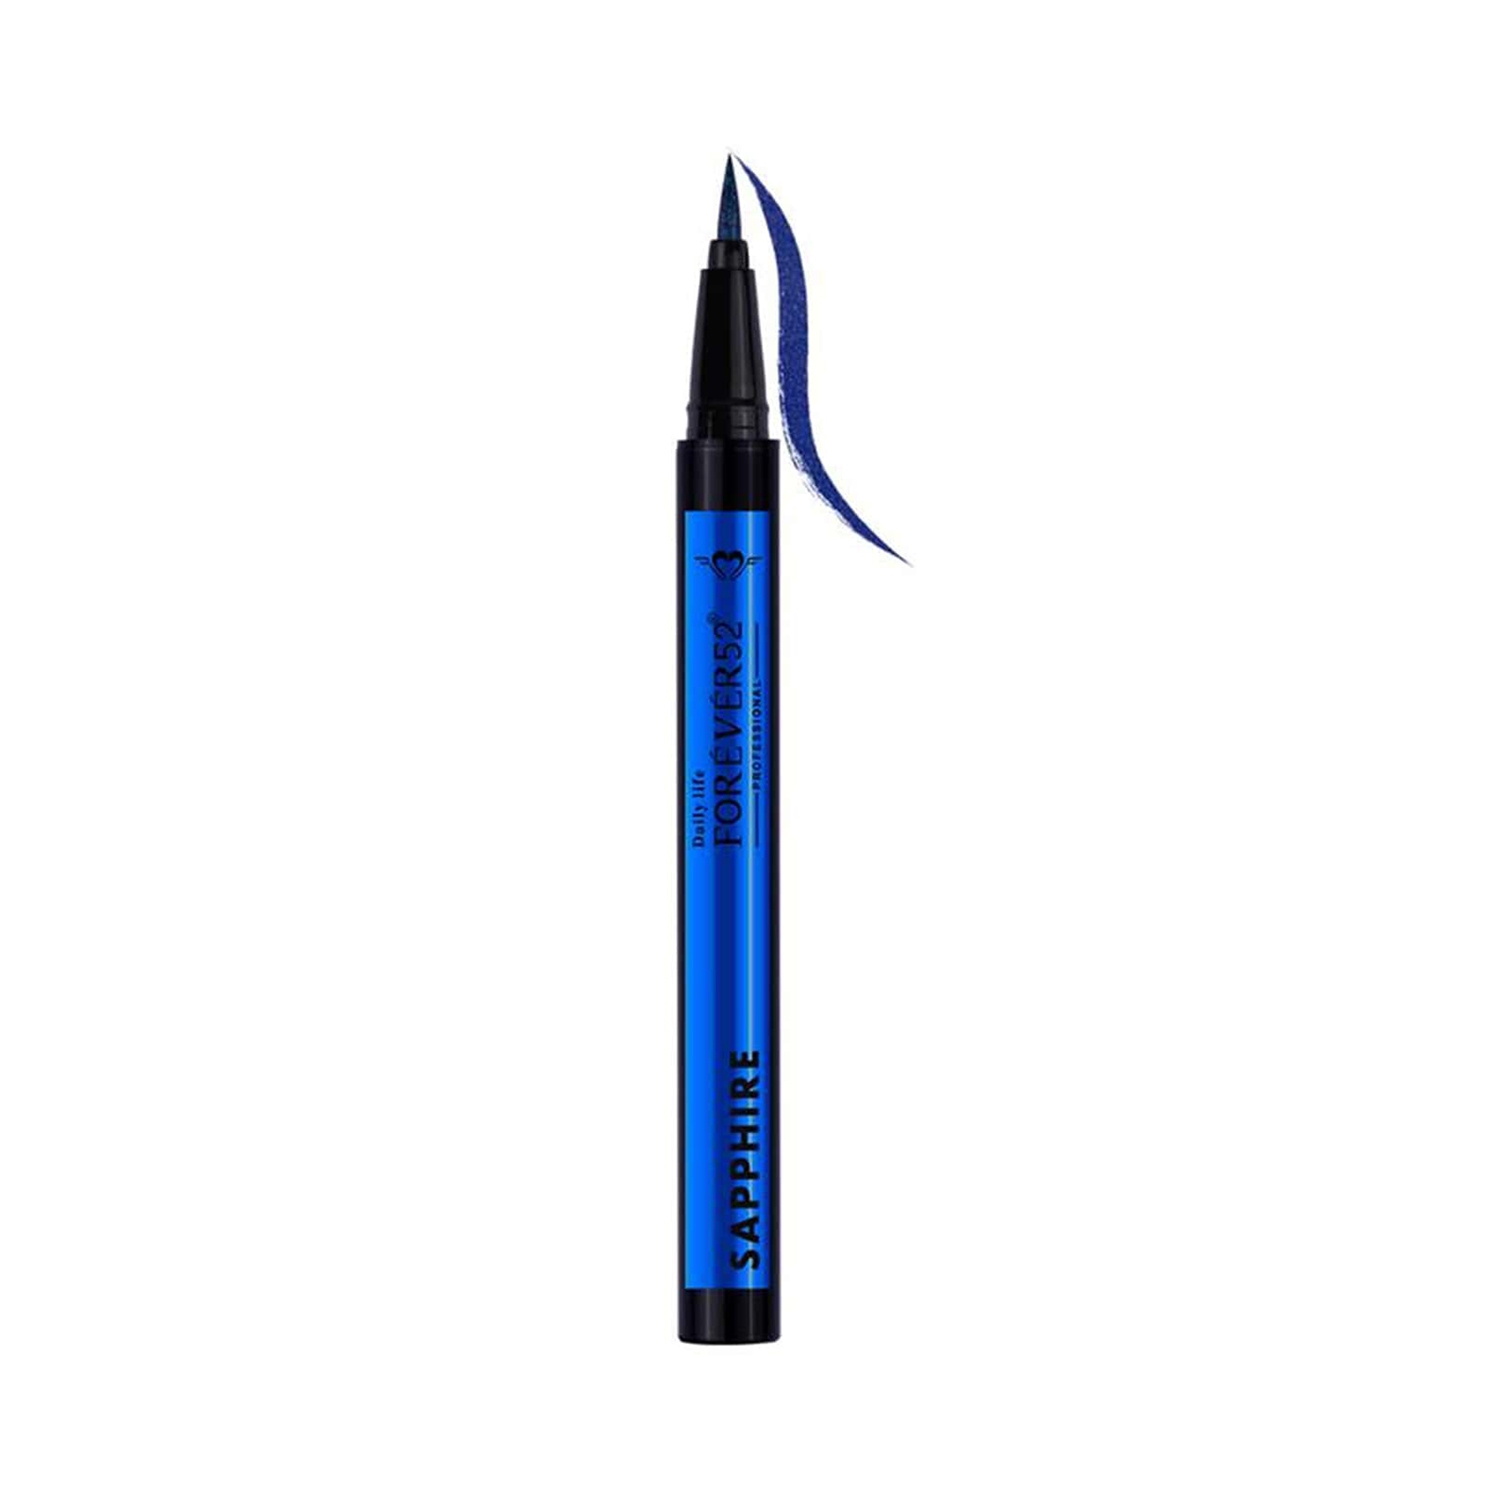 Daily Life Forever52 | Daily Life Forever52 Glitz Waterproof Eyeliner Eyeshadow - Sapphire (0.6g)